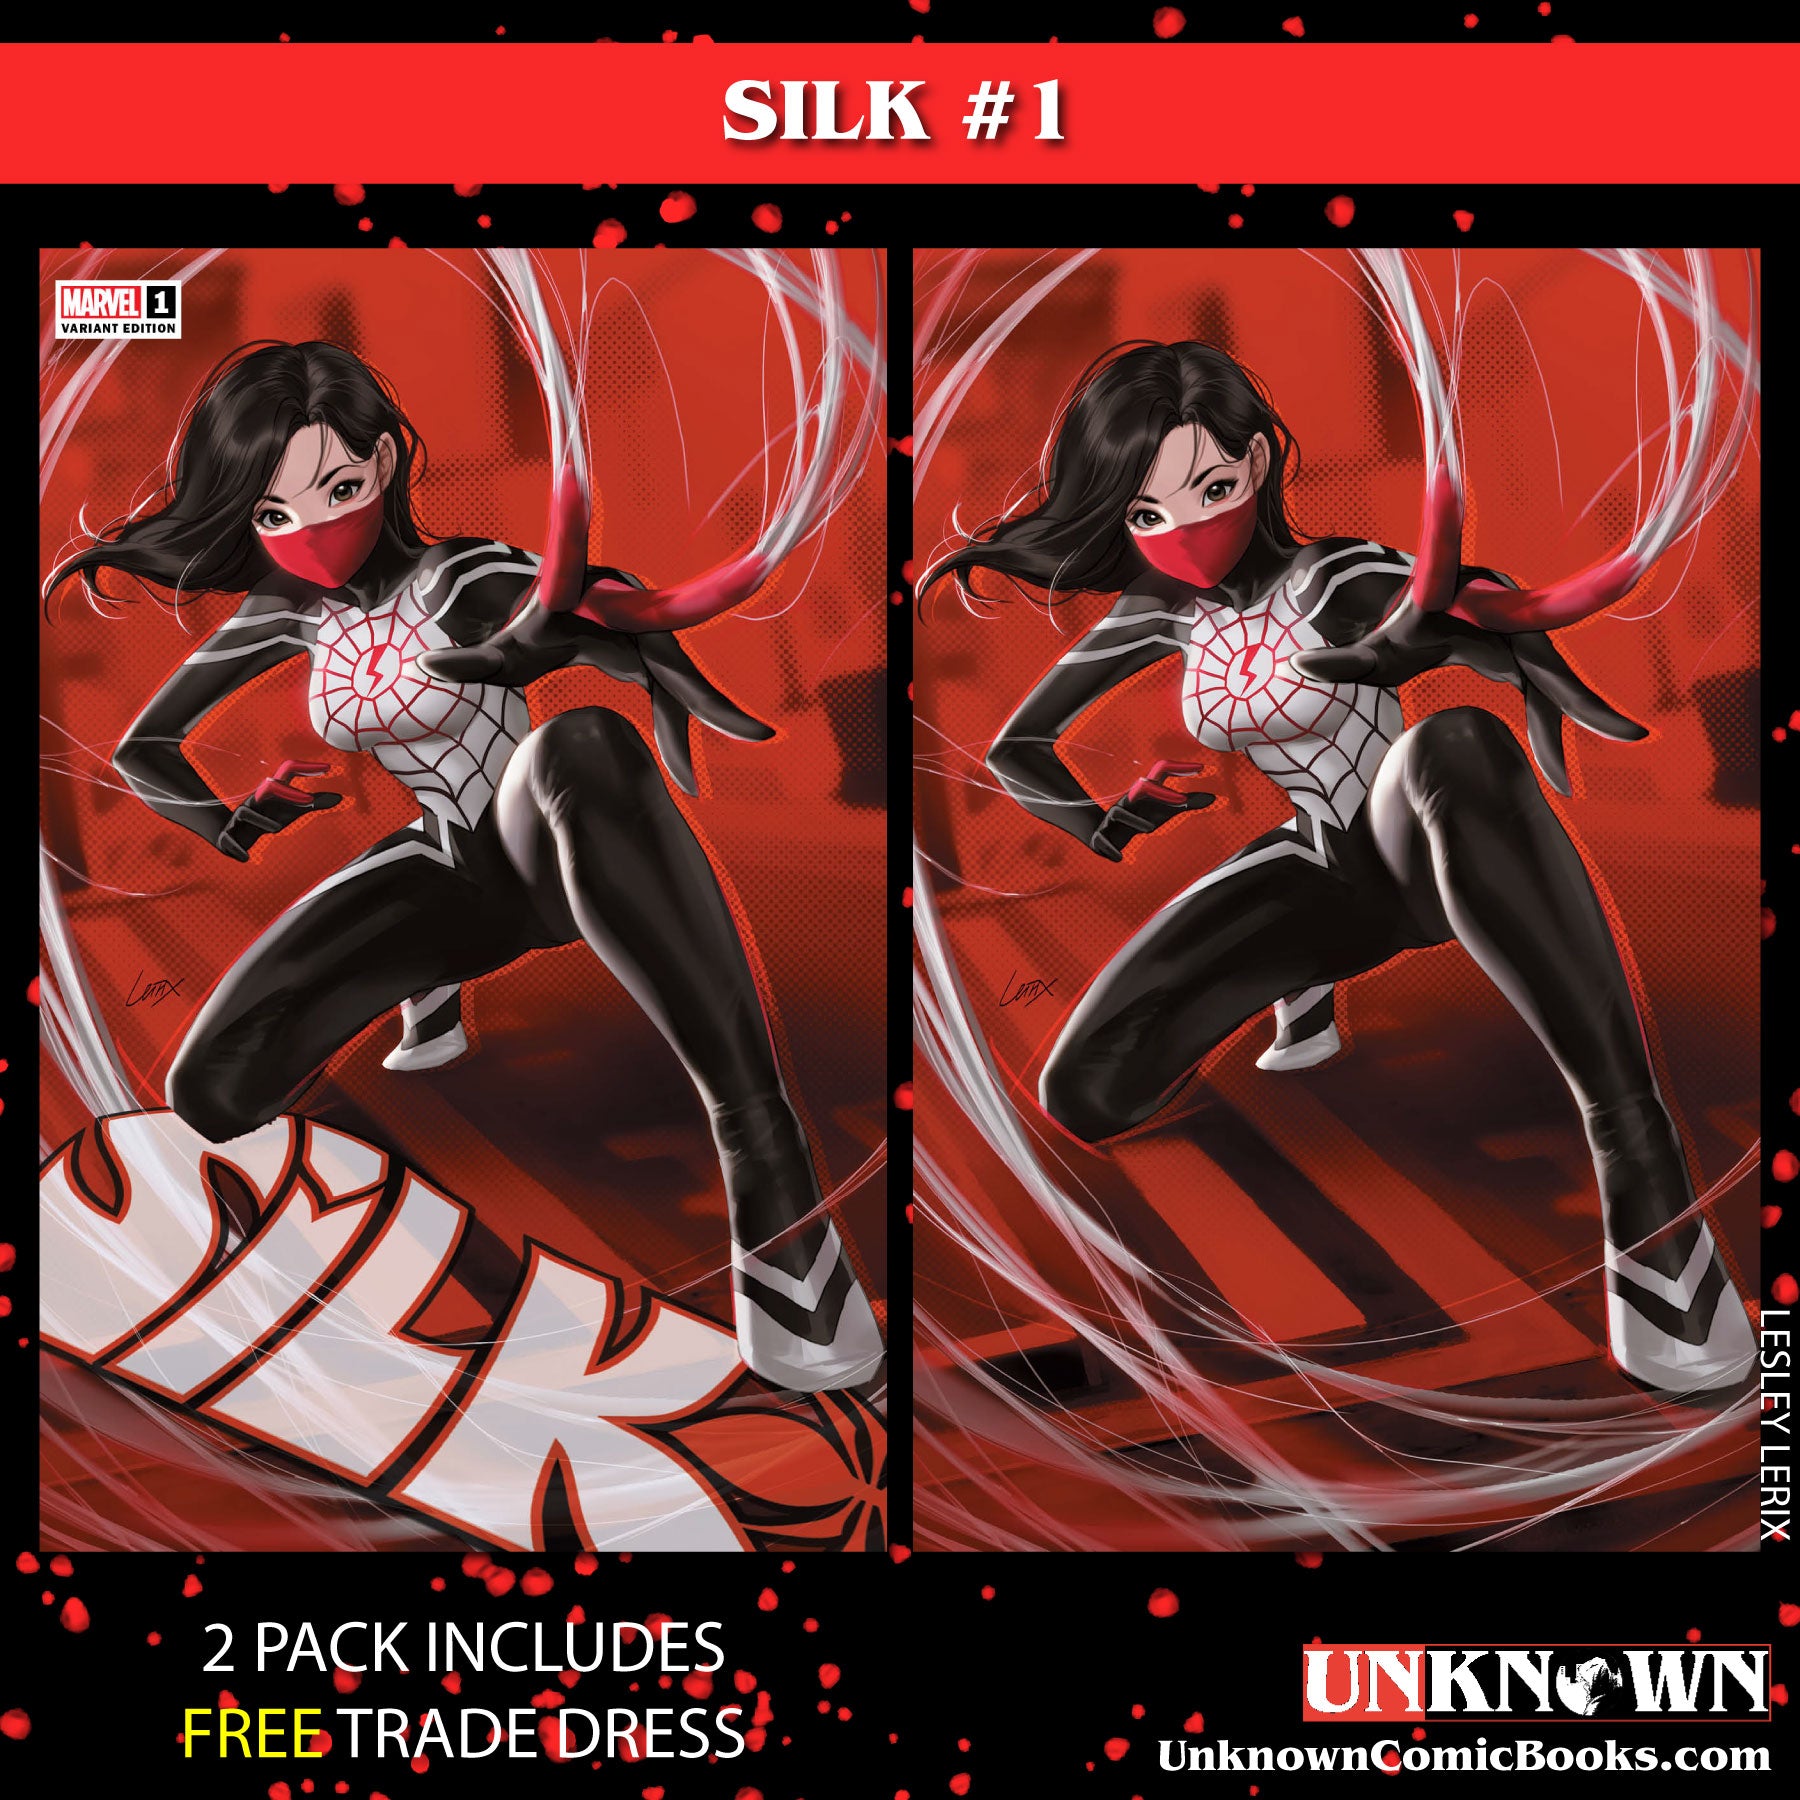 [2 PACK] **FREE TRADE DRESS** SILK #1 UNKNOWN COMICS LESLEY LERIX EXCLUSIVE VAR (05/10/2023)